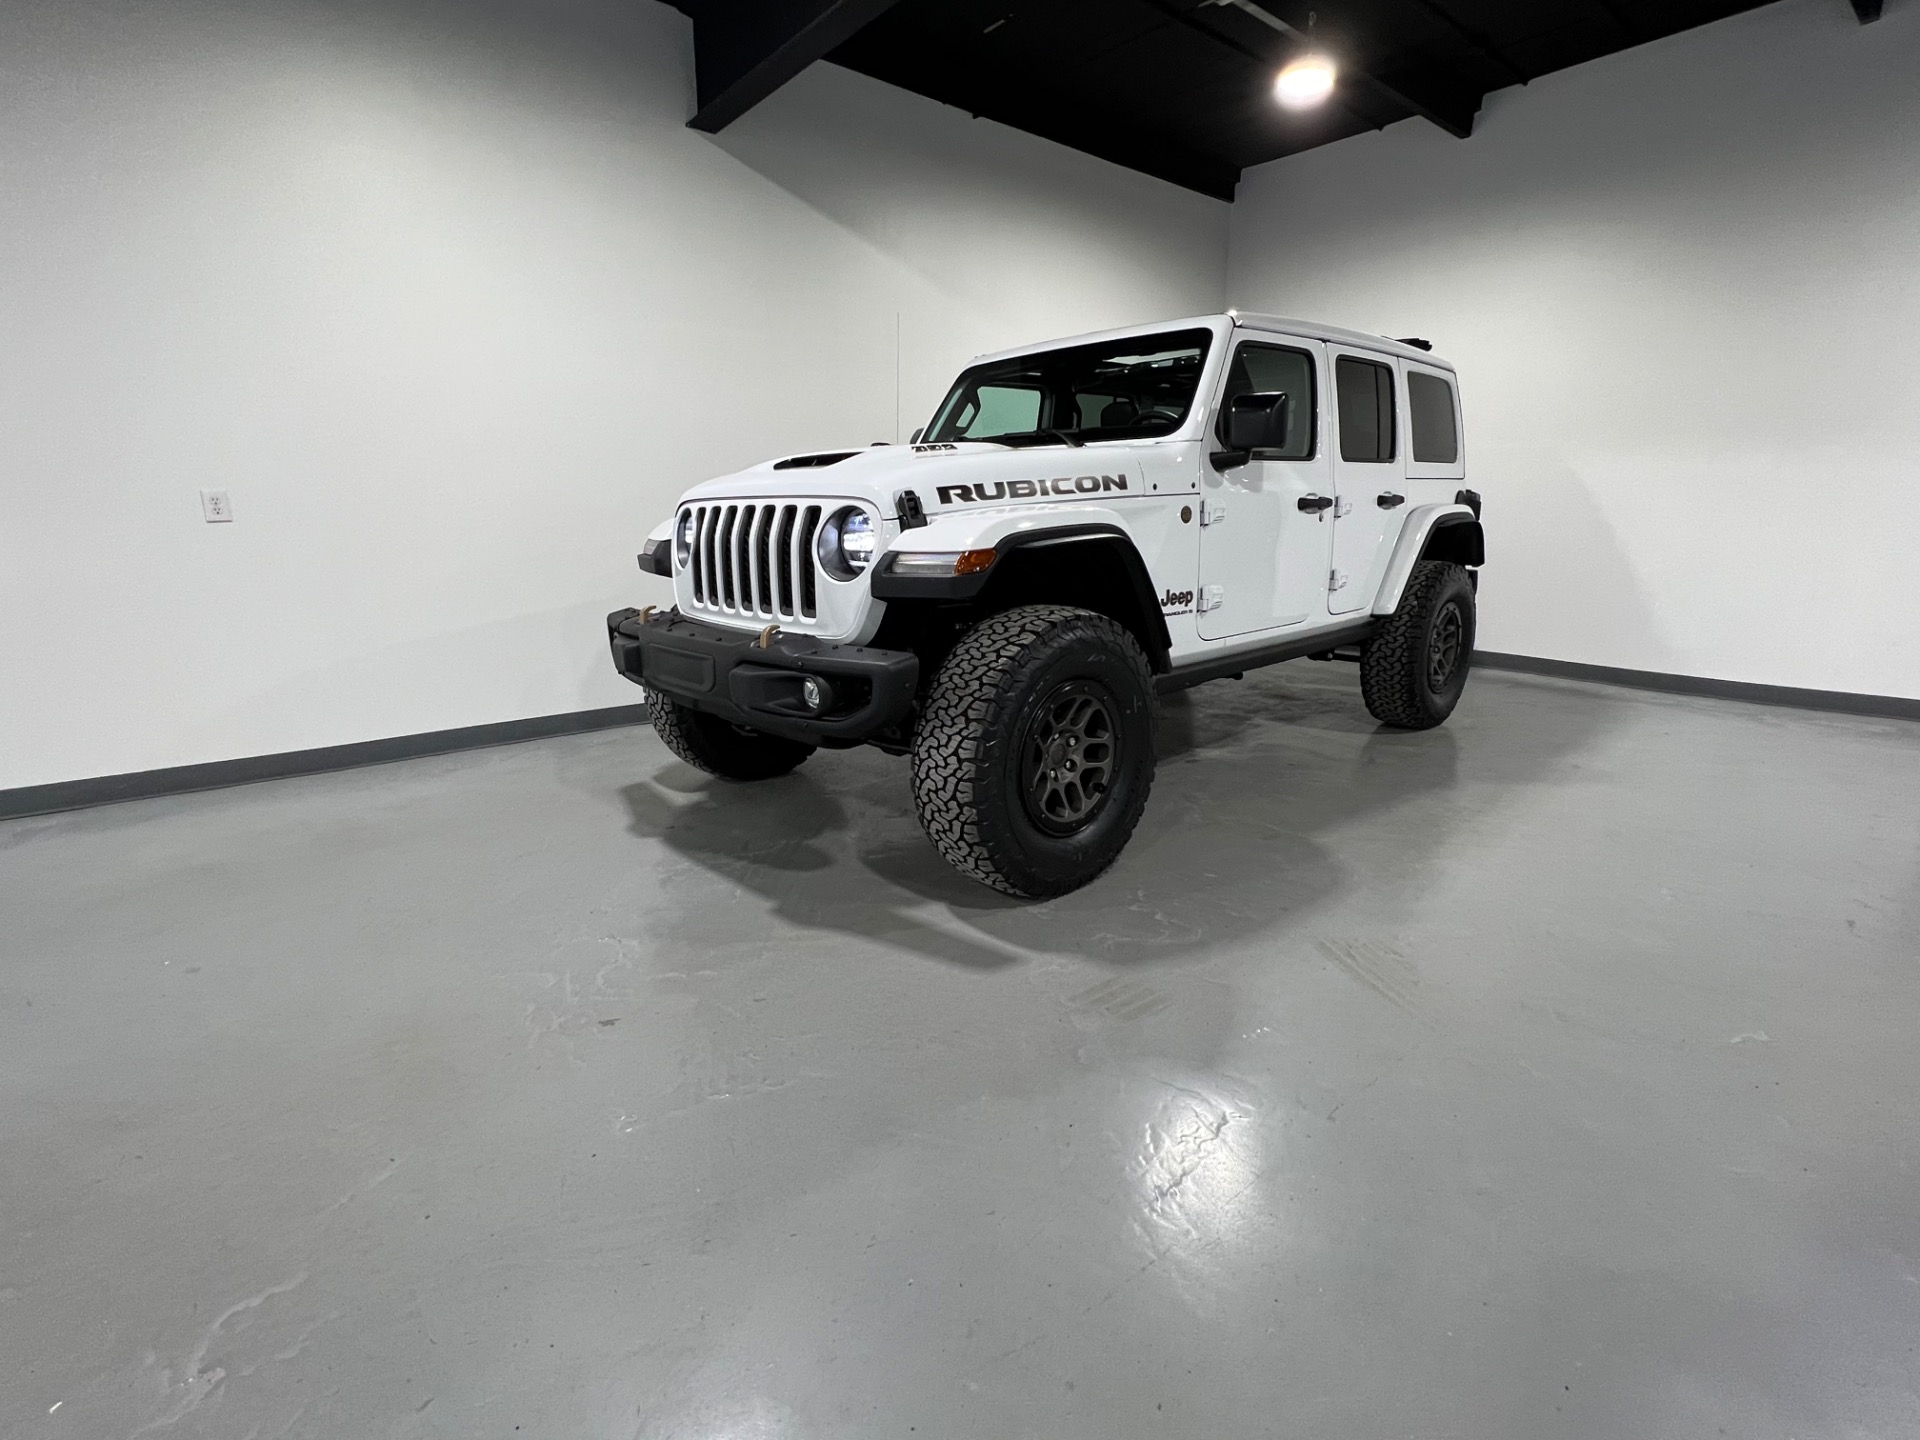 Used 2023 Bright White Clear Coat Jeep Wrangler Unlimited RUBICON 392 4X4  470HP Rubicon 392 For Sale (Sold) | Prime Motorz Stock #4006